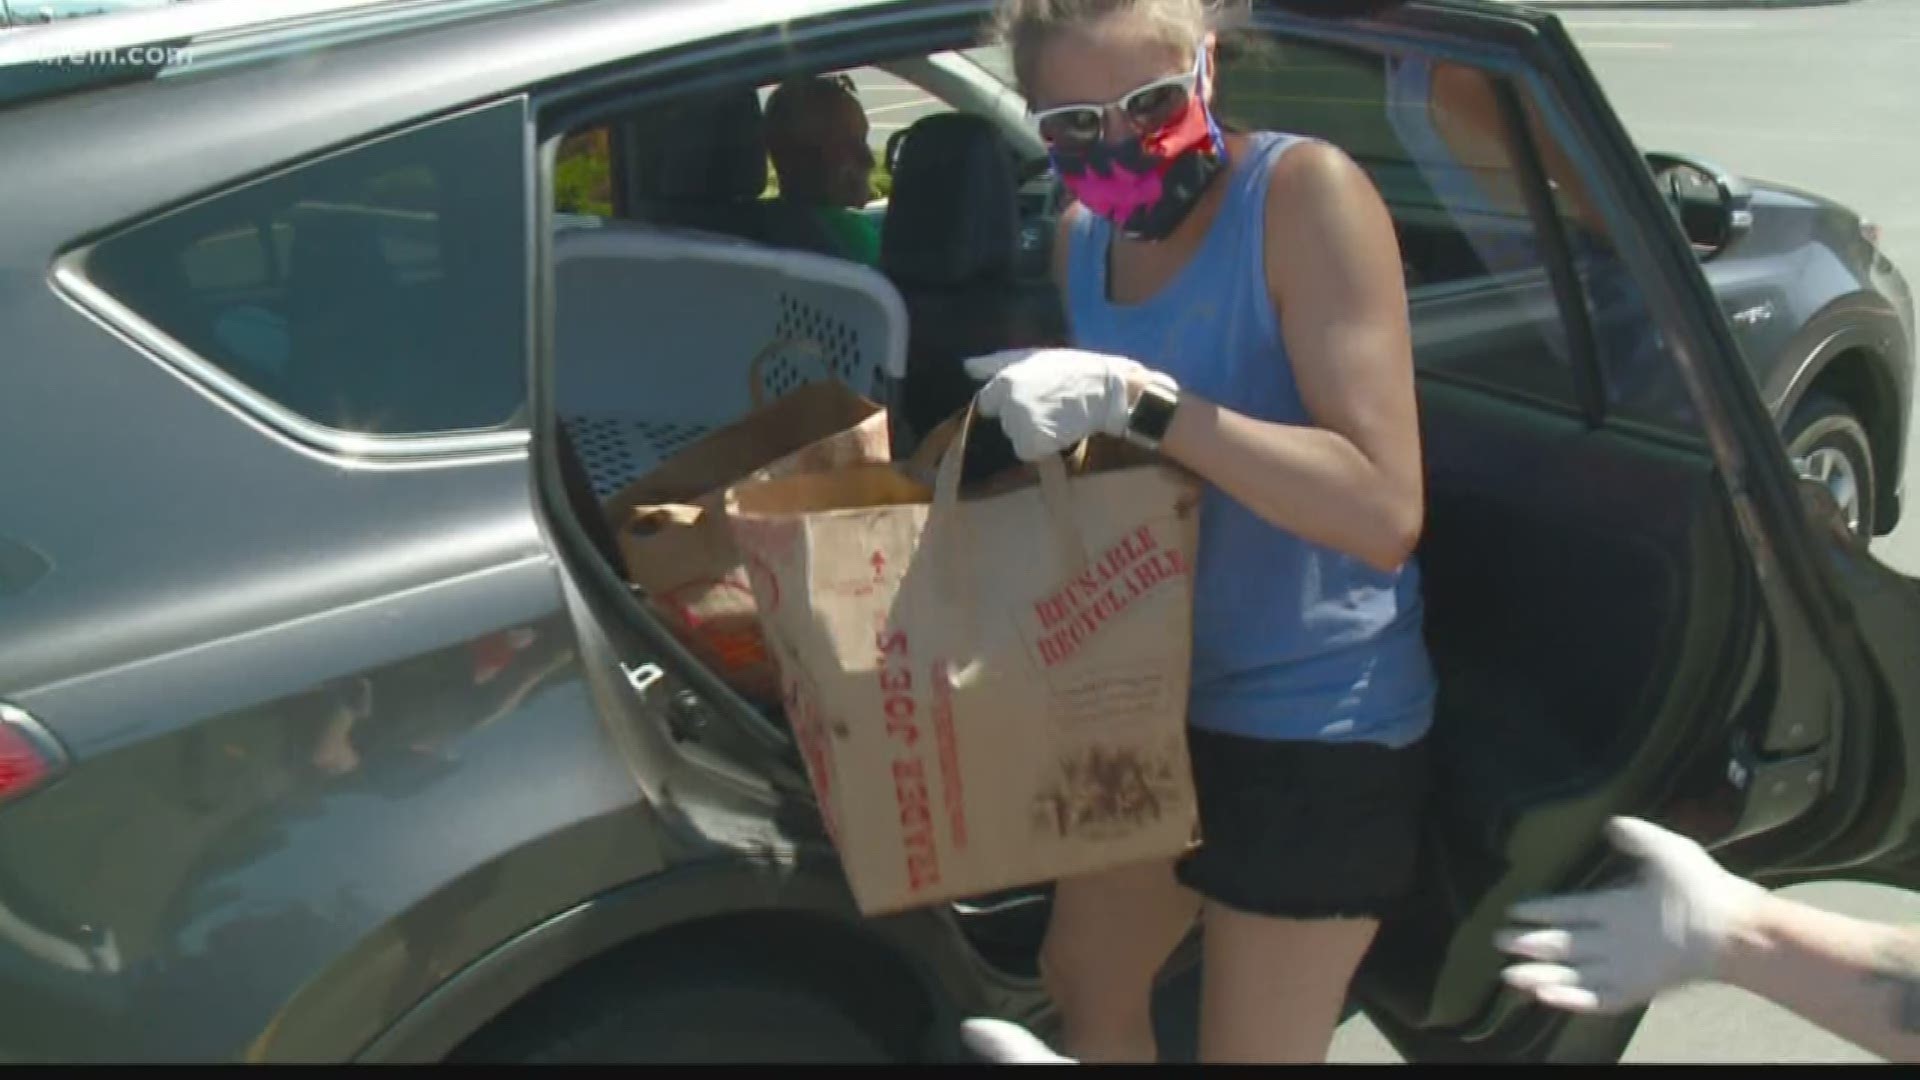 More than four hundred cars drove through to drop off donations outside of the church to help make sure no one goes hungry.